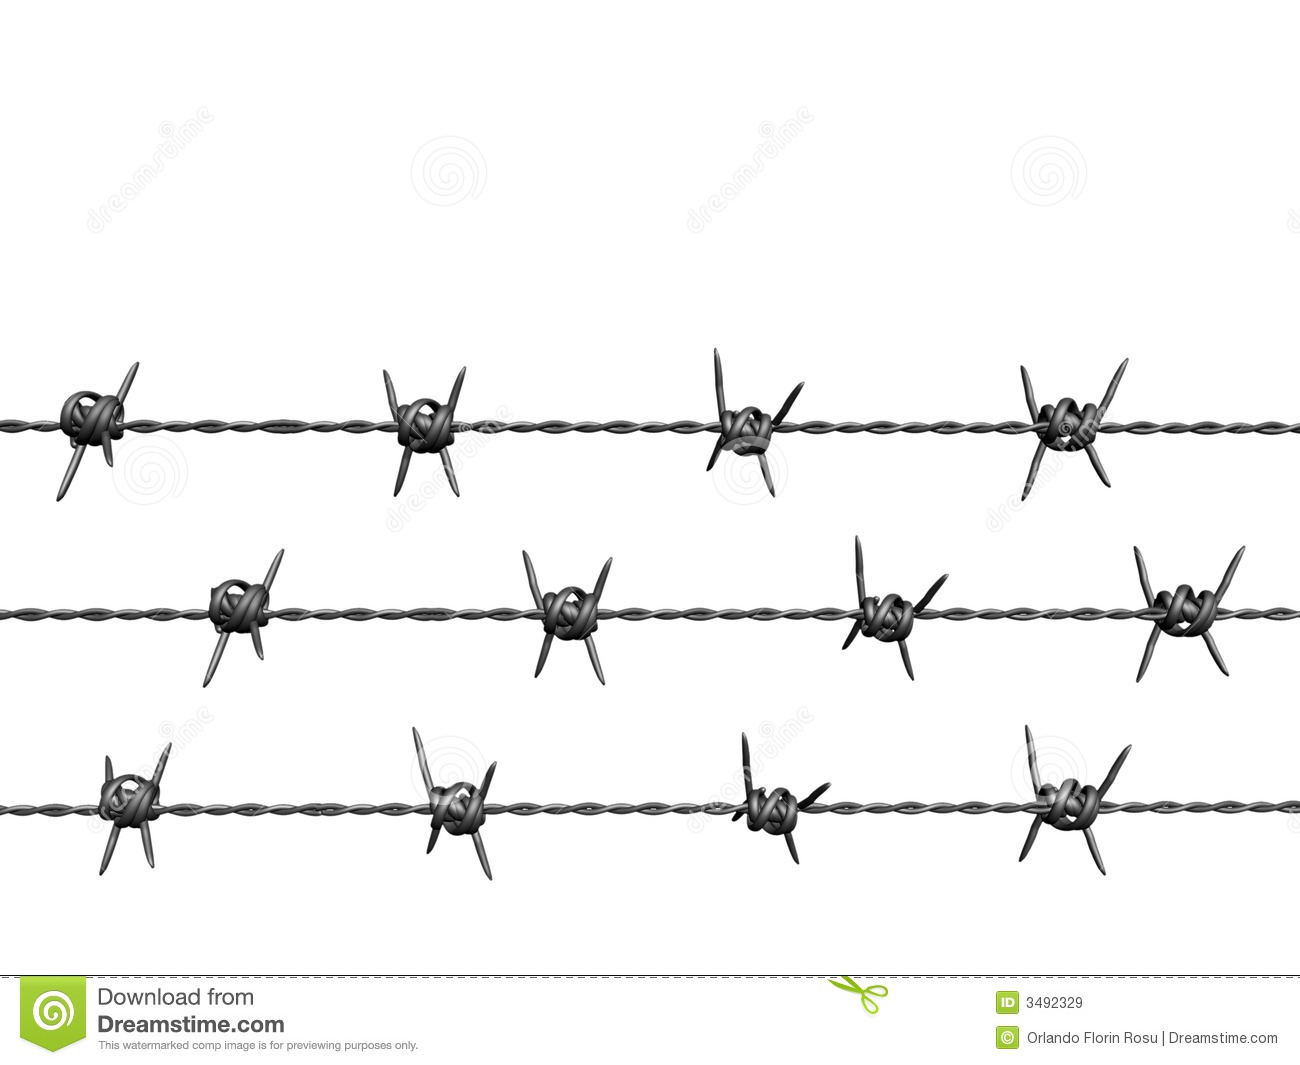 Displaying 18 Images For Barb - Barbed Wire Clip Art